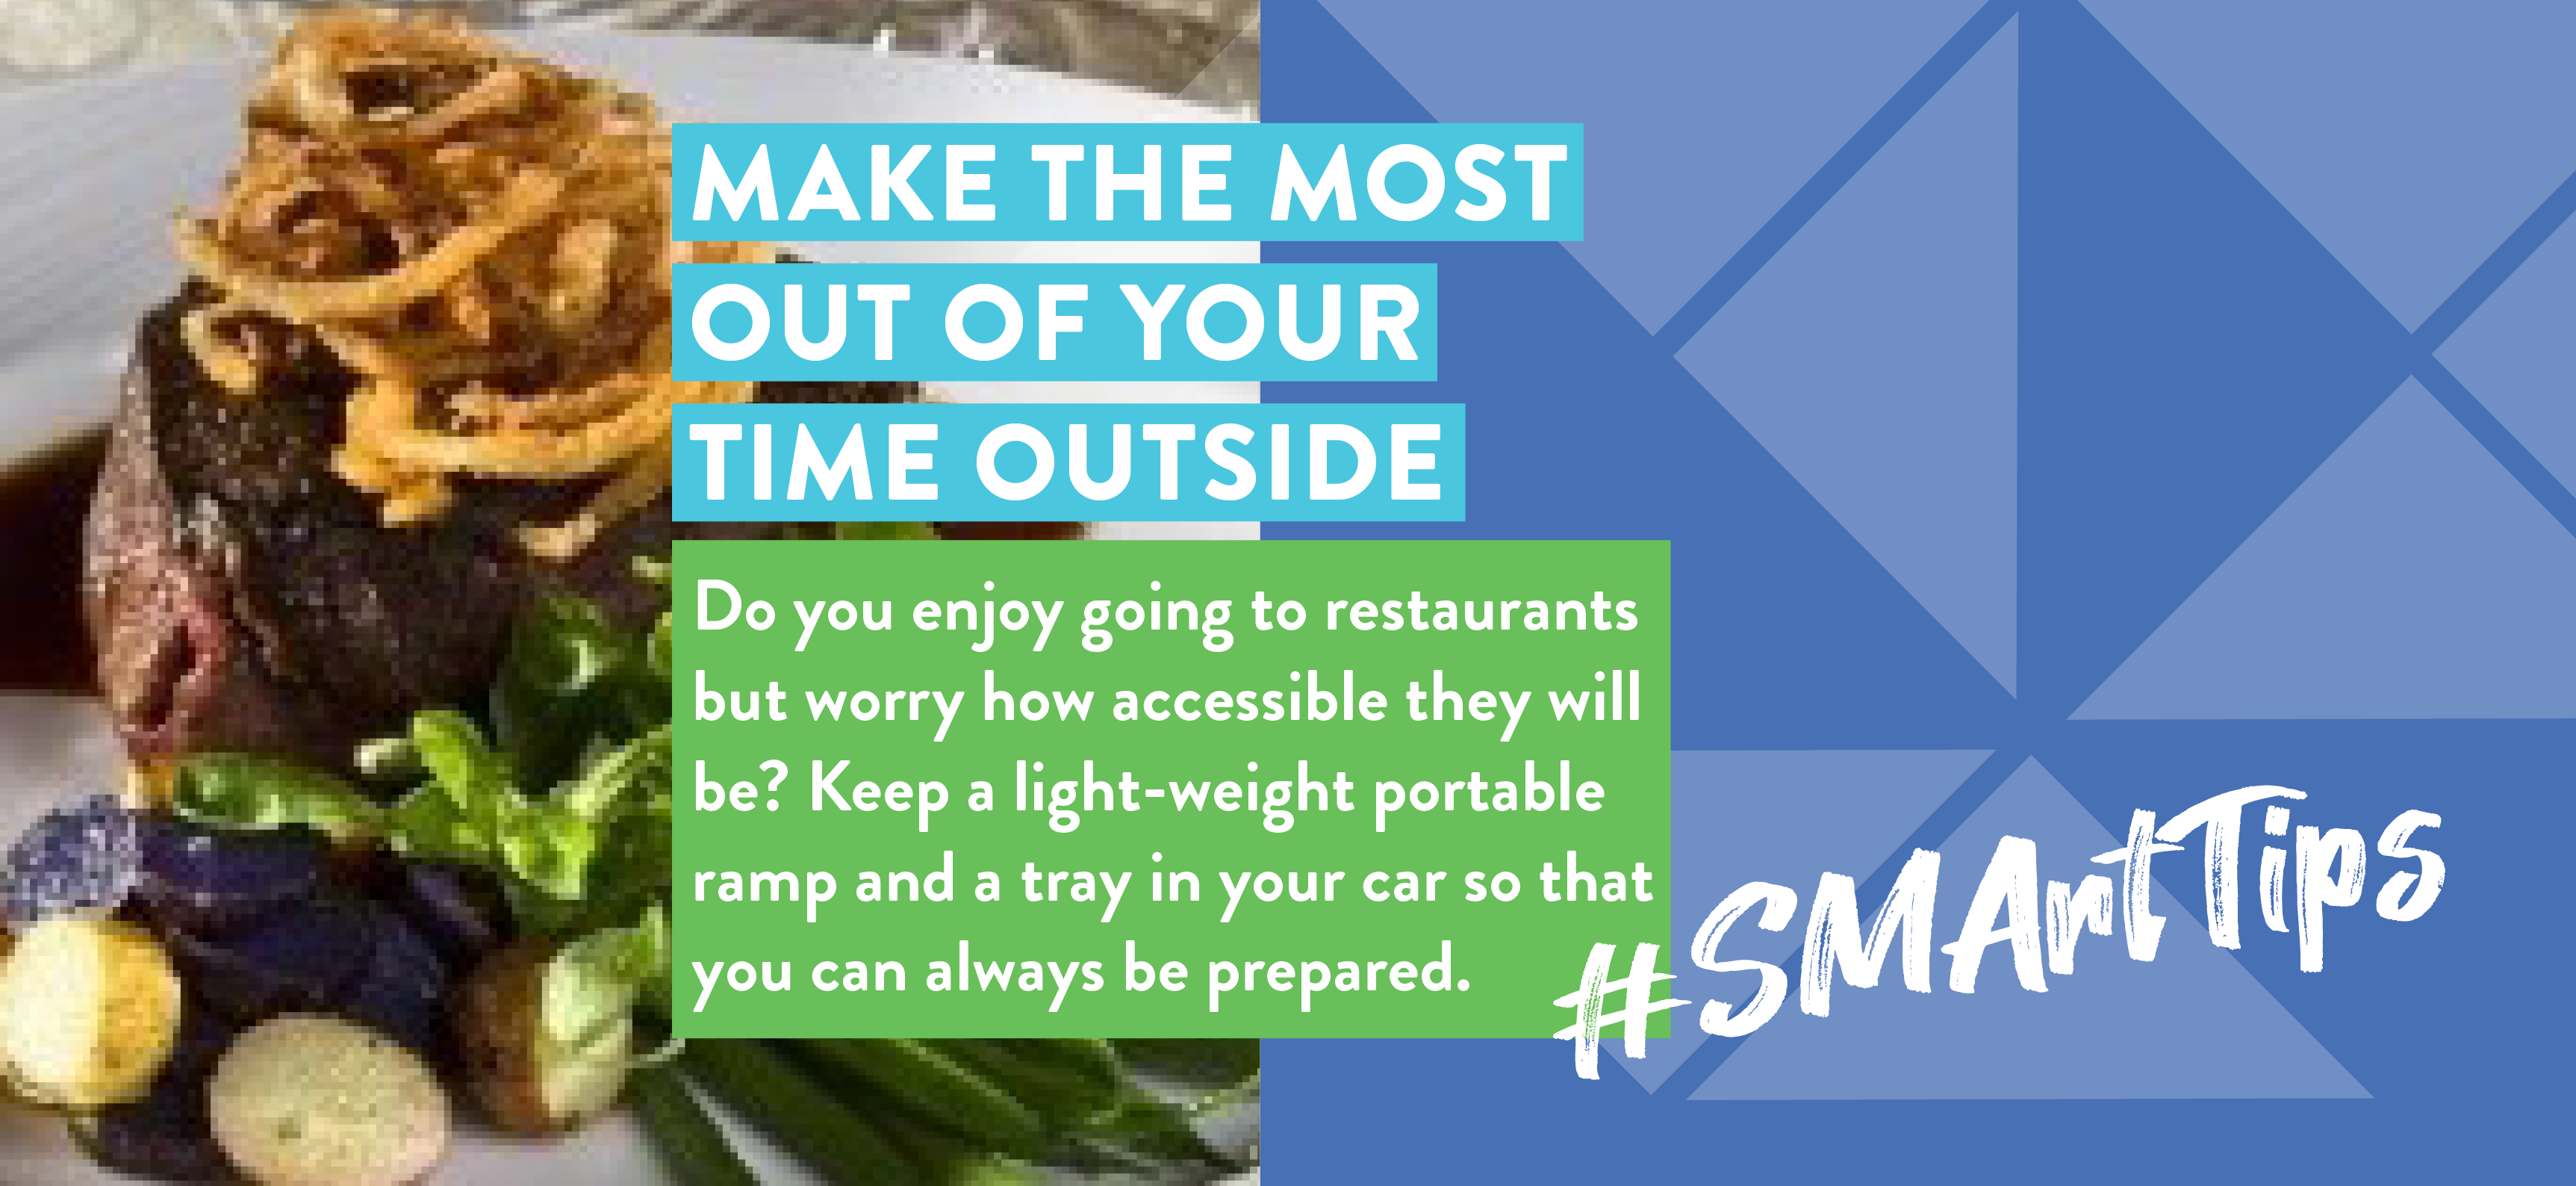 Make the most of your time outside.